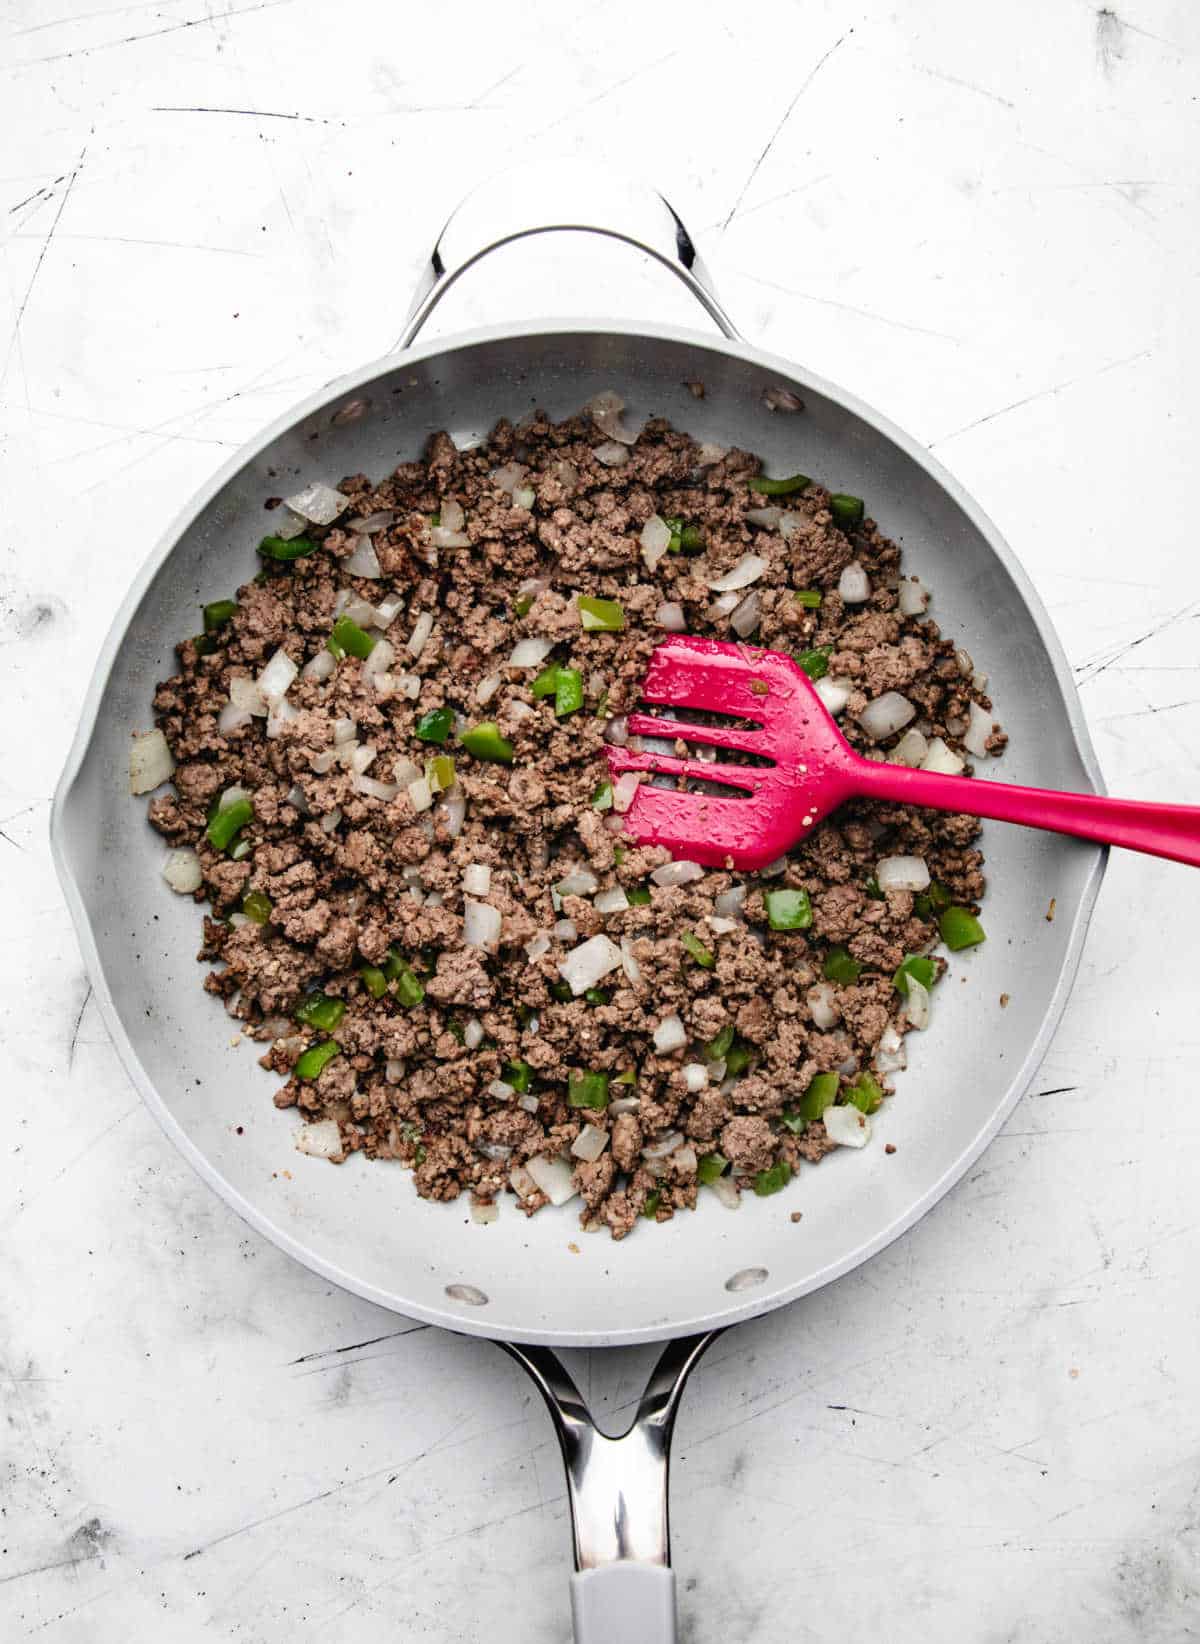 Garlic stirred into ground beef and vegetable mixture in a skillet.